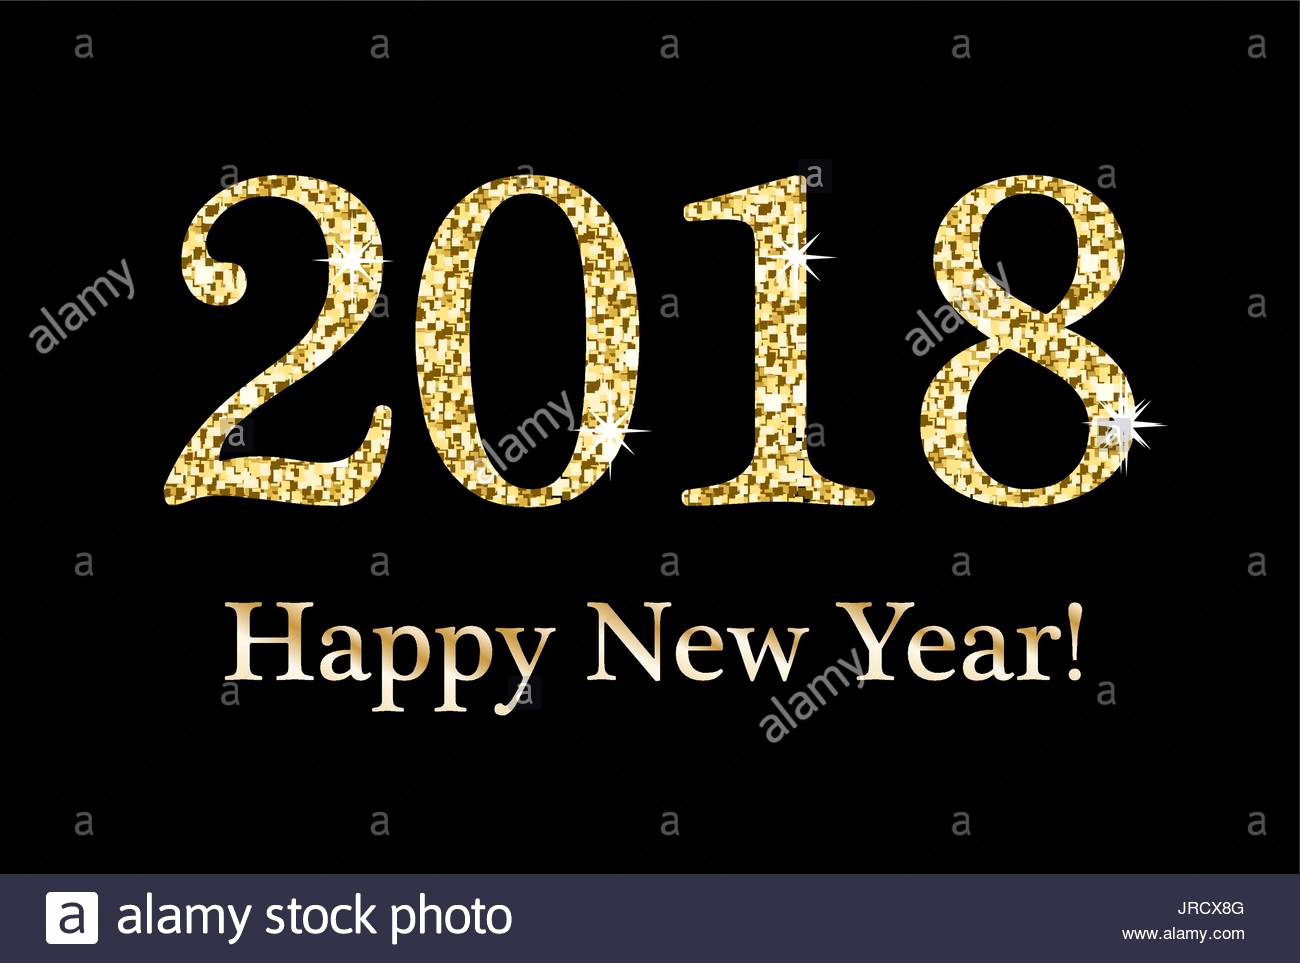 New Year Card Template Best Of Happy New Year Greeting Card Template for Your Design